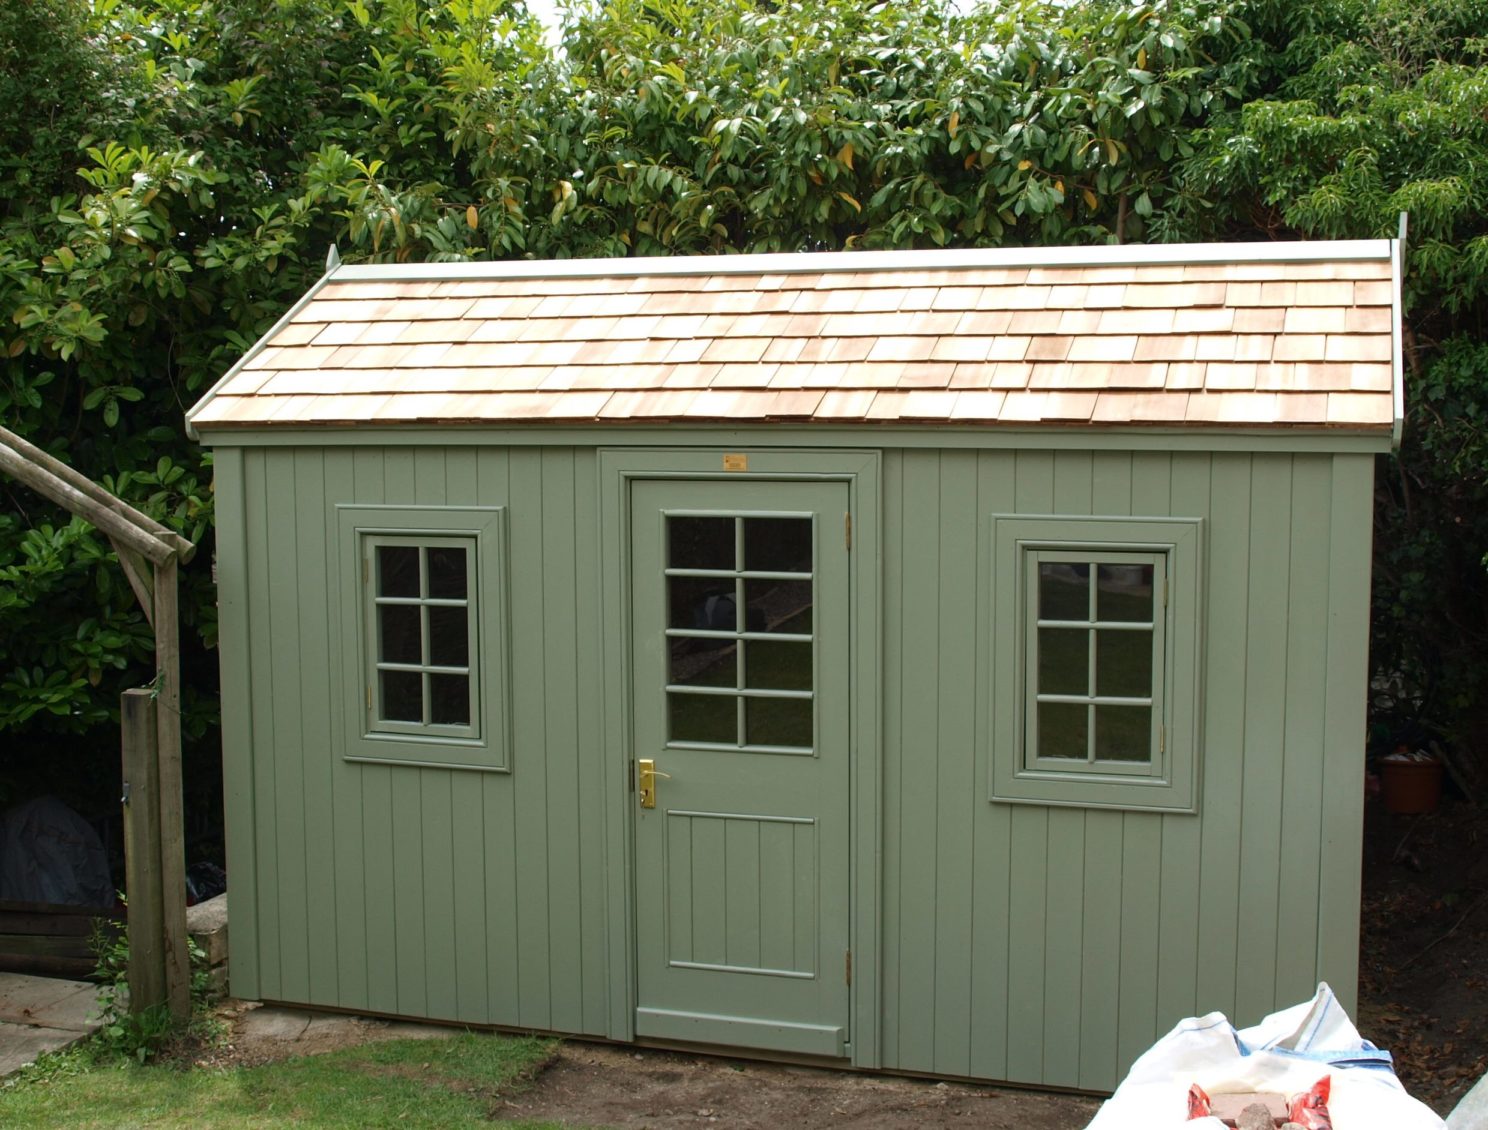 Very Posh Shed with wooden cedar shingles on roof